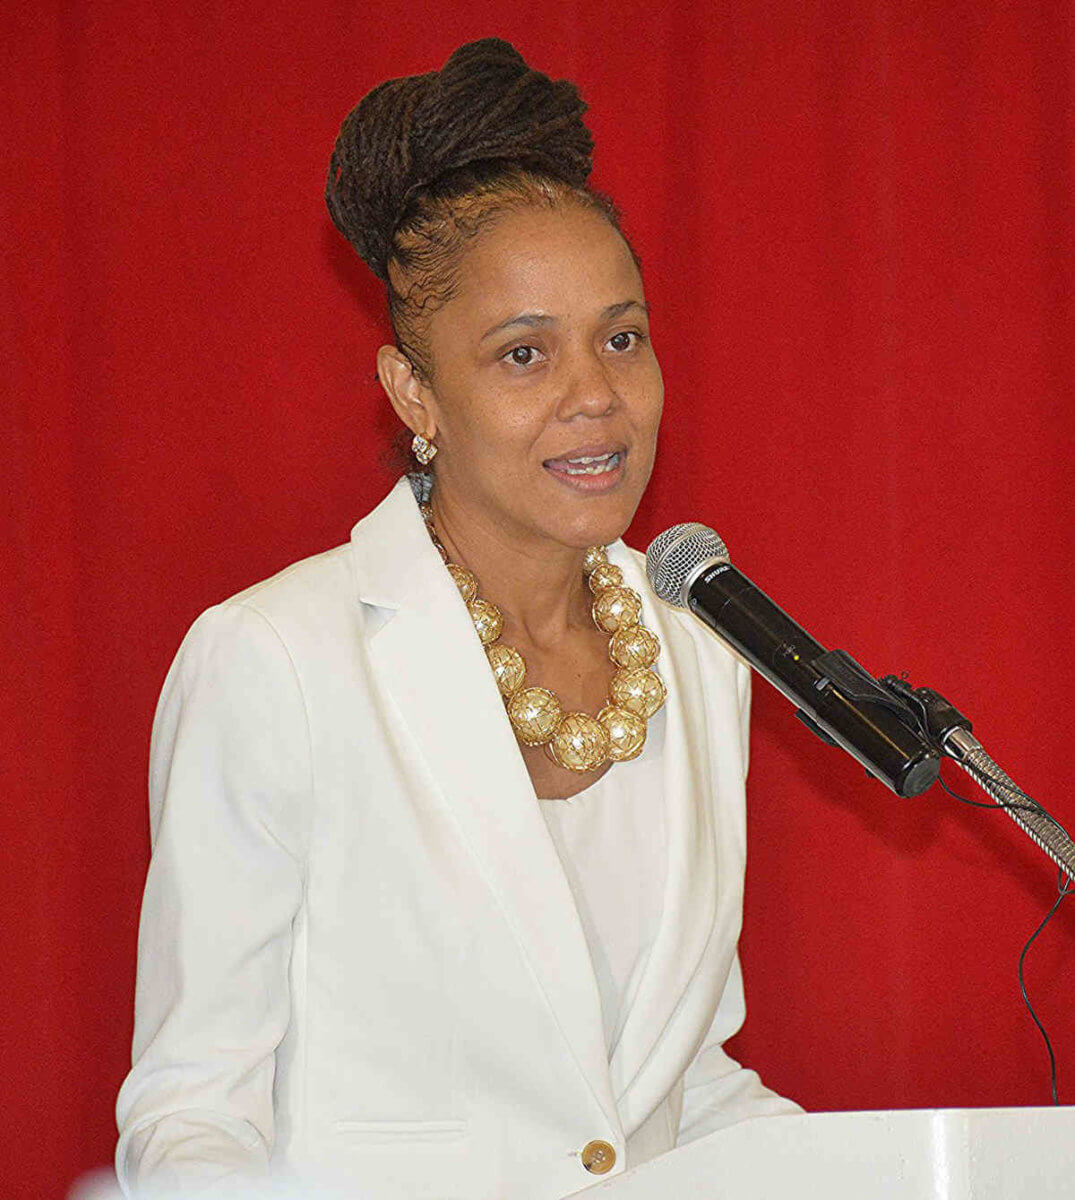 Bajan politician using own cancer to inspire